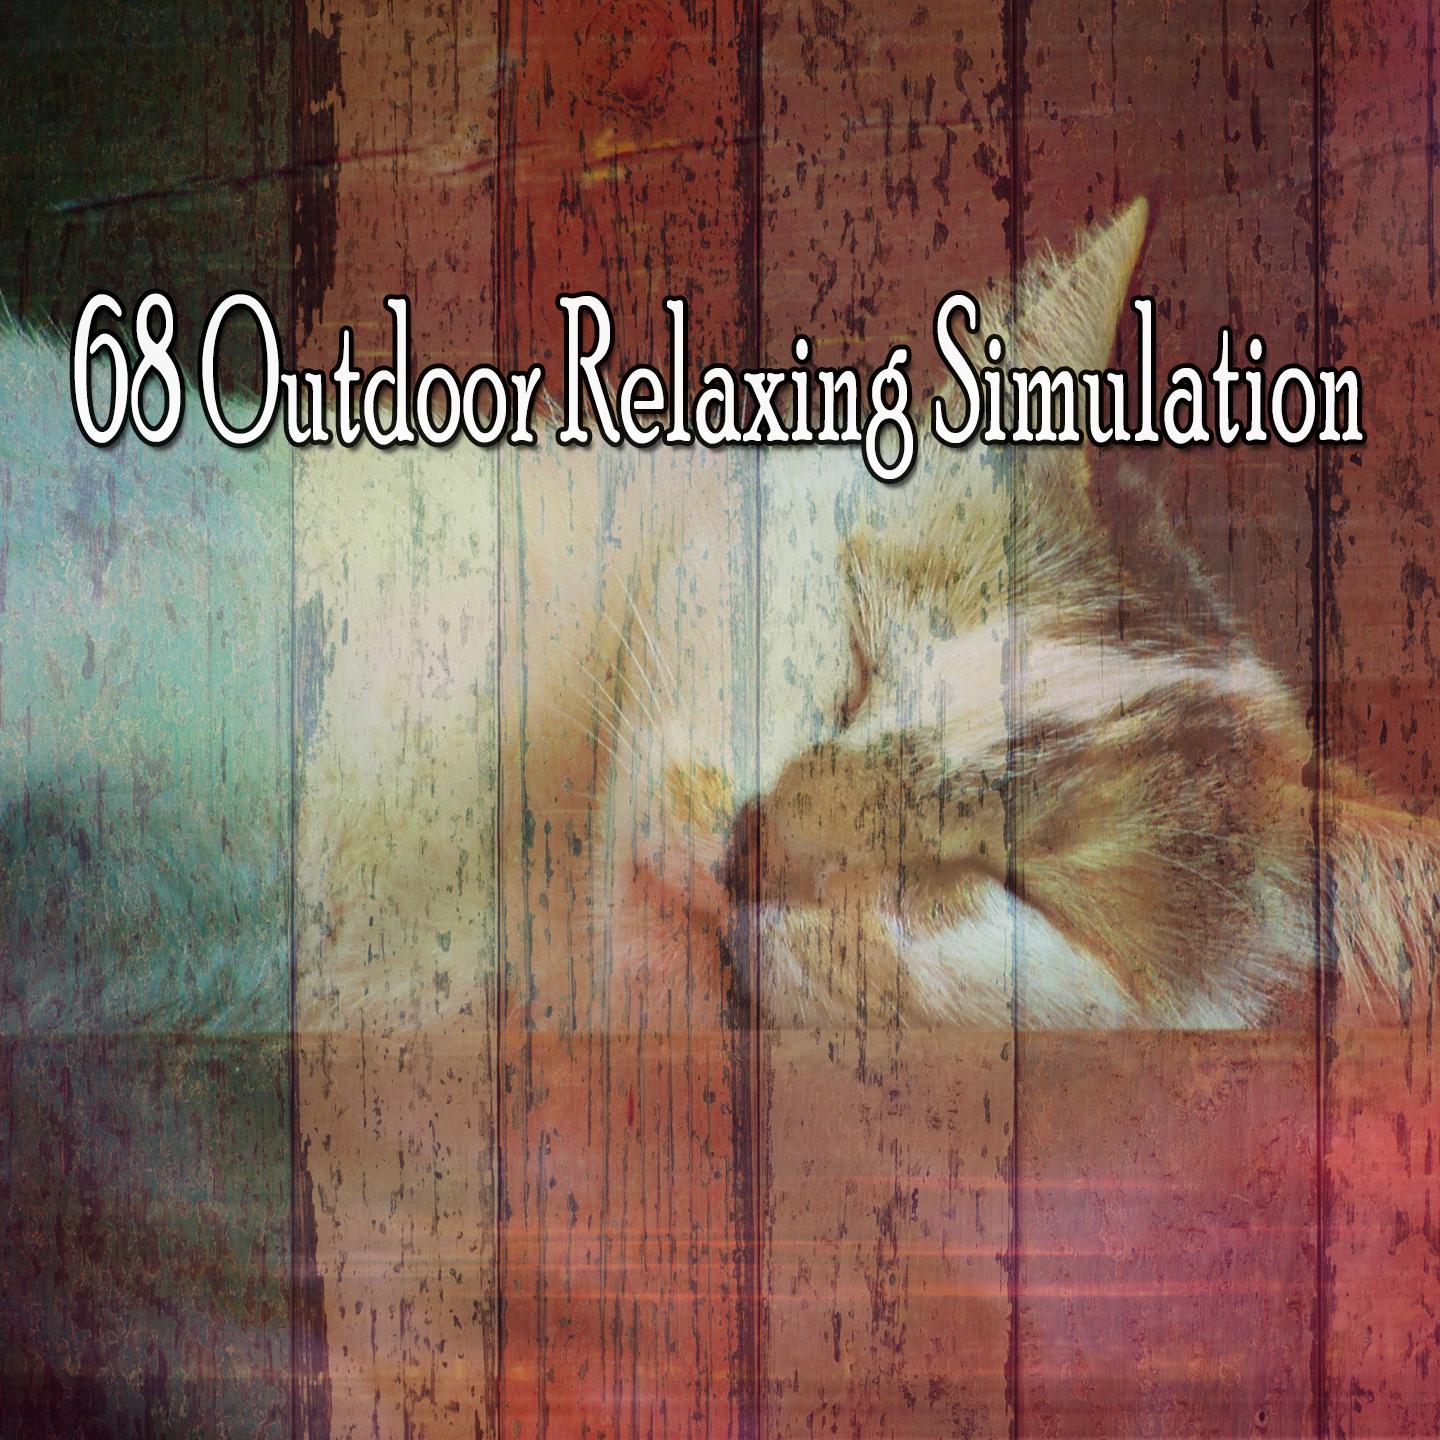 68 Outdoor Relaxing Simulation